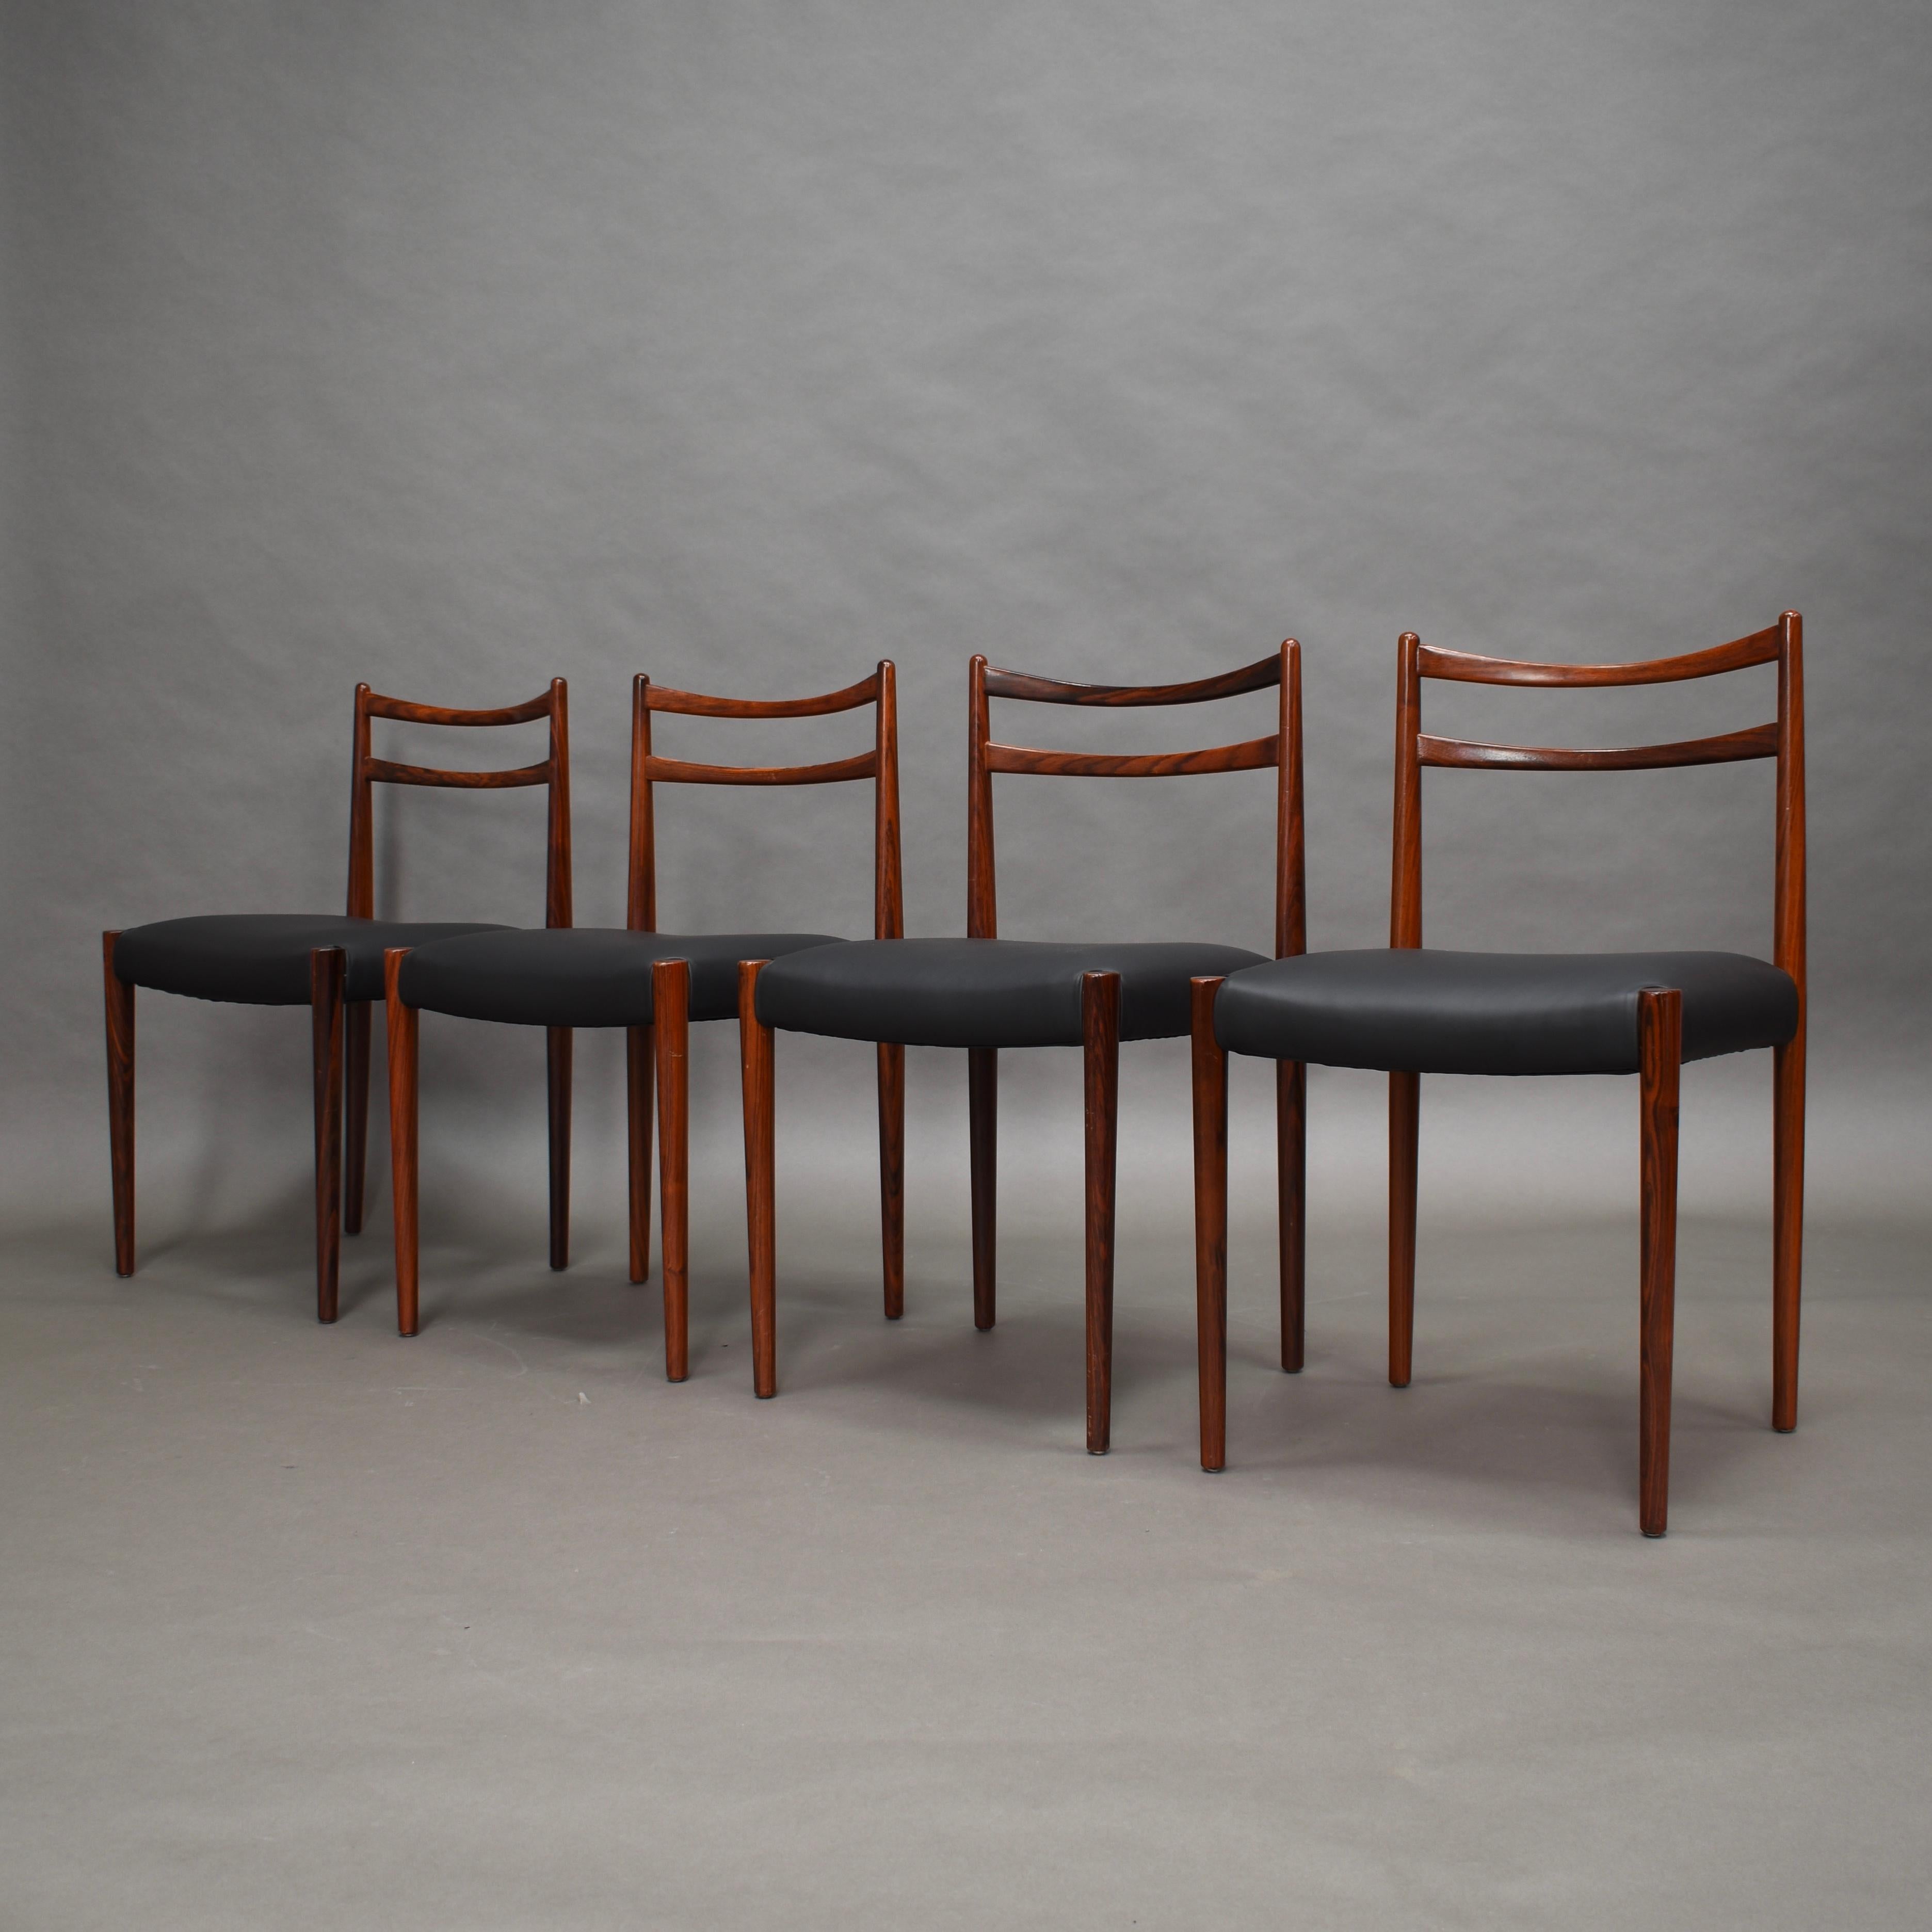 Elegant and organic shaped Scandinavian Danish dinner chairs from the 1950s.
The chairs are made of solid Brazilian rosewood (Rio Palissander) and feature tapered legs and new upholstered seats in beautiful black calf skin leather.
The chairs are